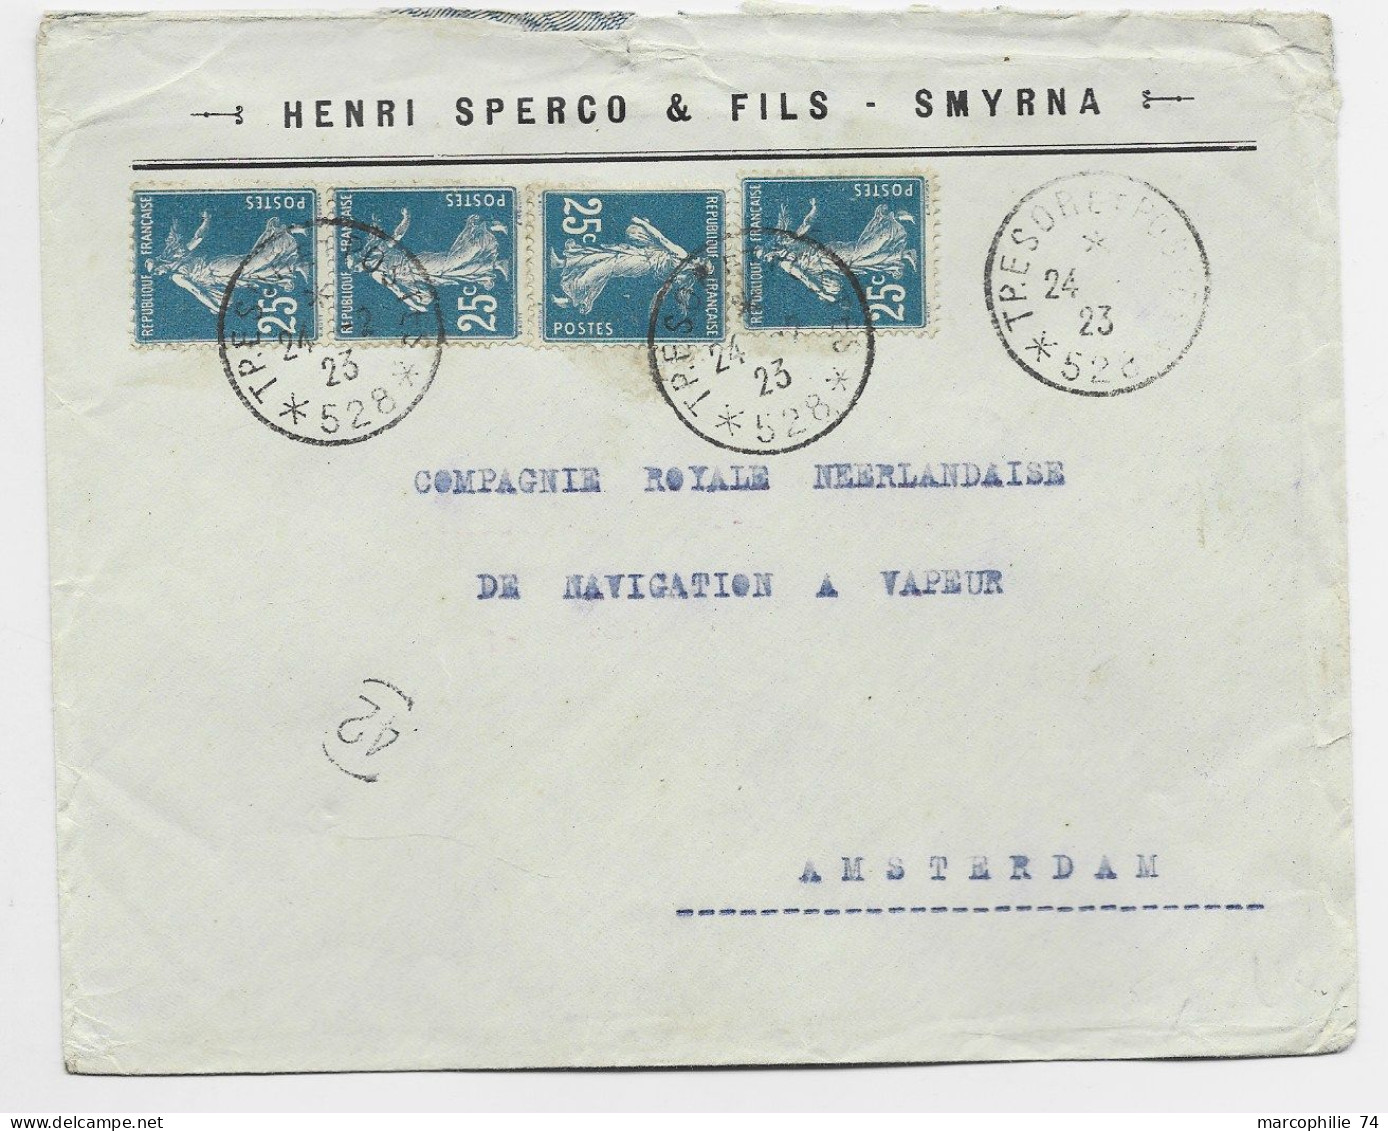 FRANCE SEMEUSE 25CX4 LETTRE COVER ENTETE SMYRNA + TRESOR ET POSTES 24.2.1923 *528* TO  AMSTERDAM HOLLANDE - Military Postmarks From 1900 (out Of Wars Periods)